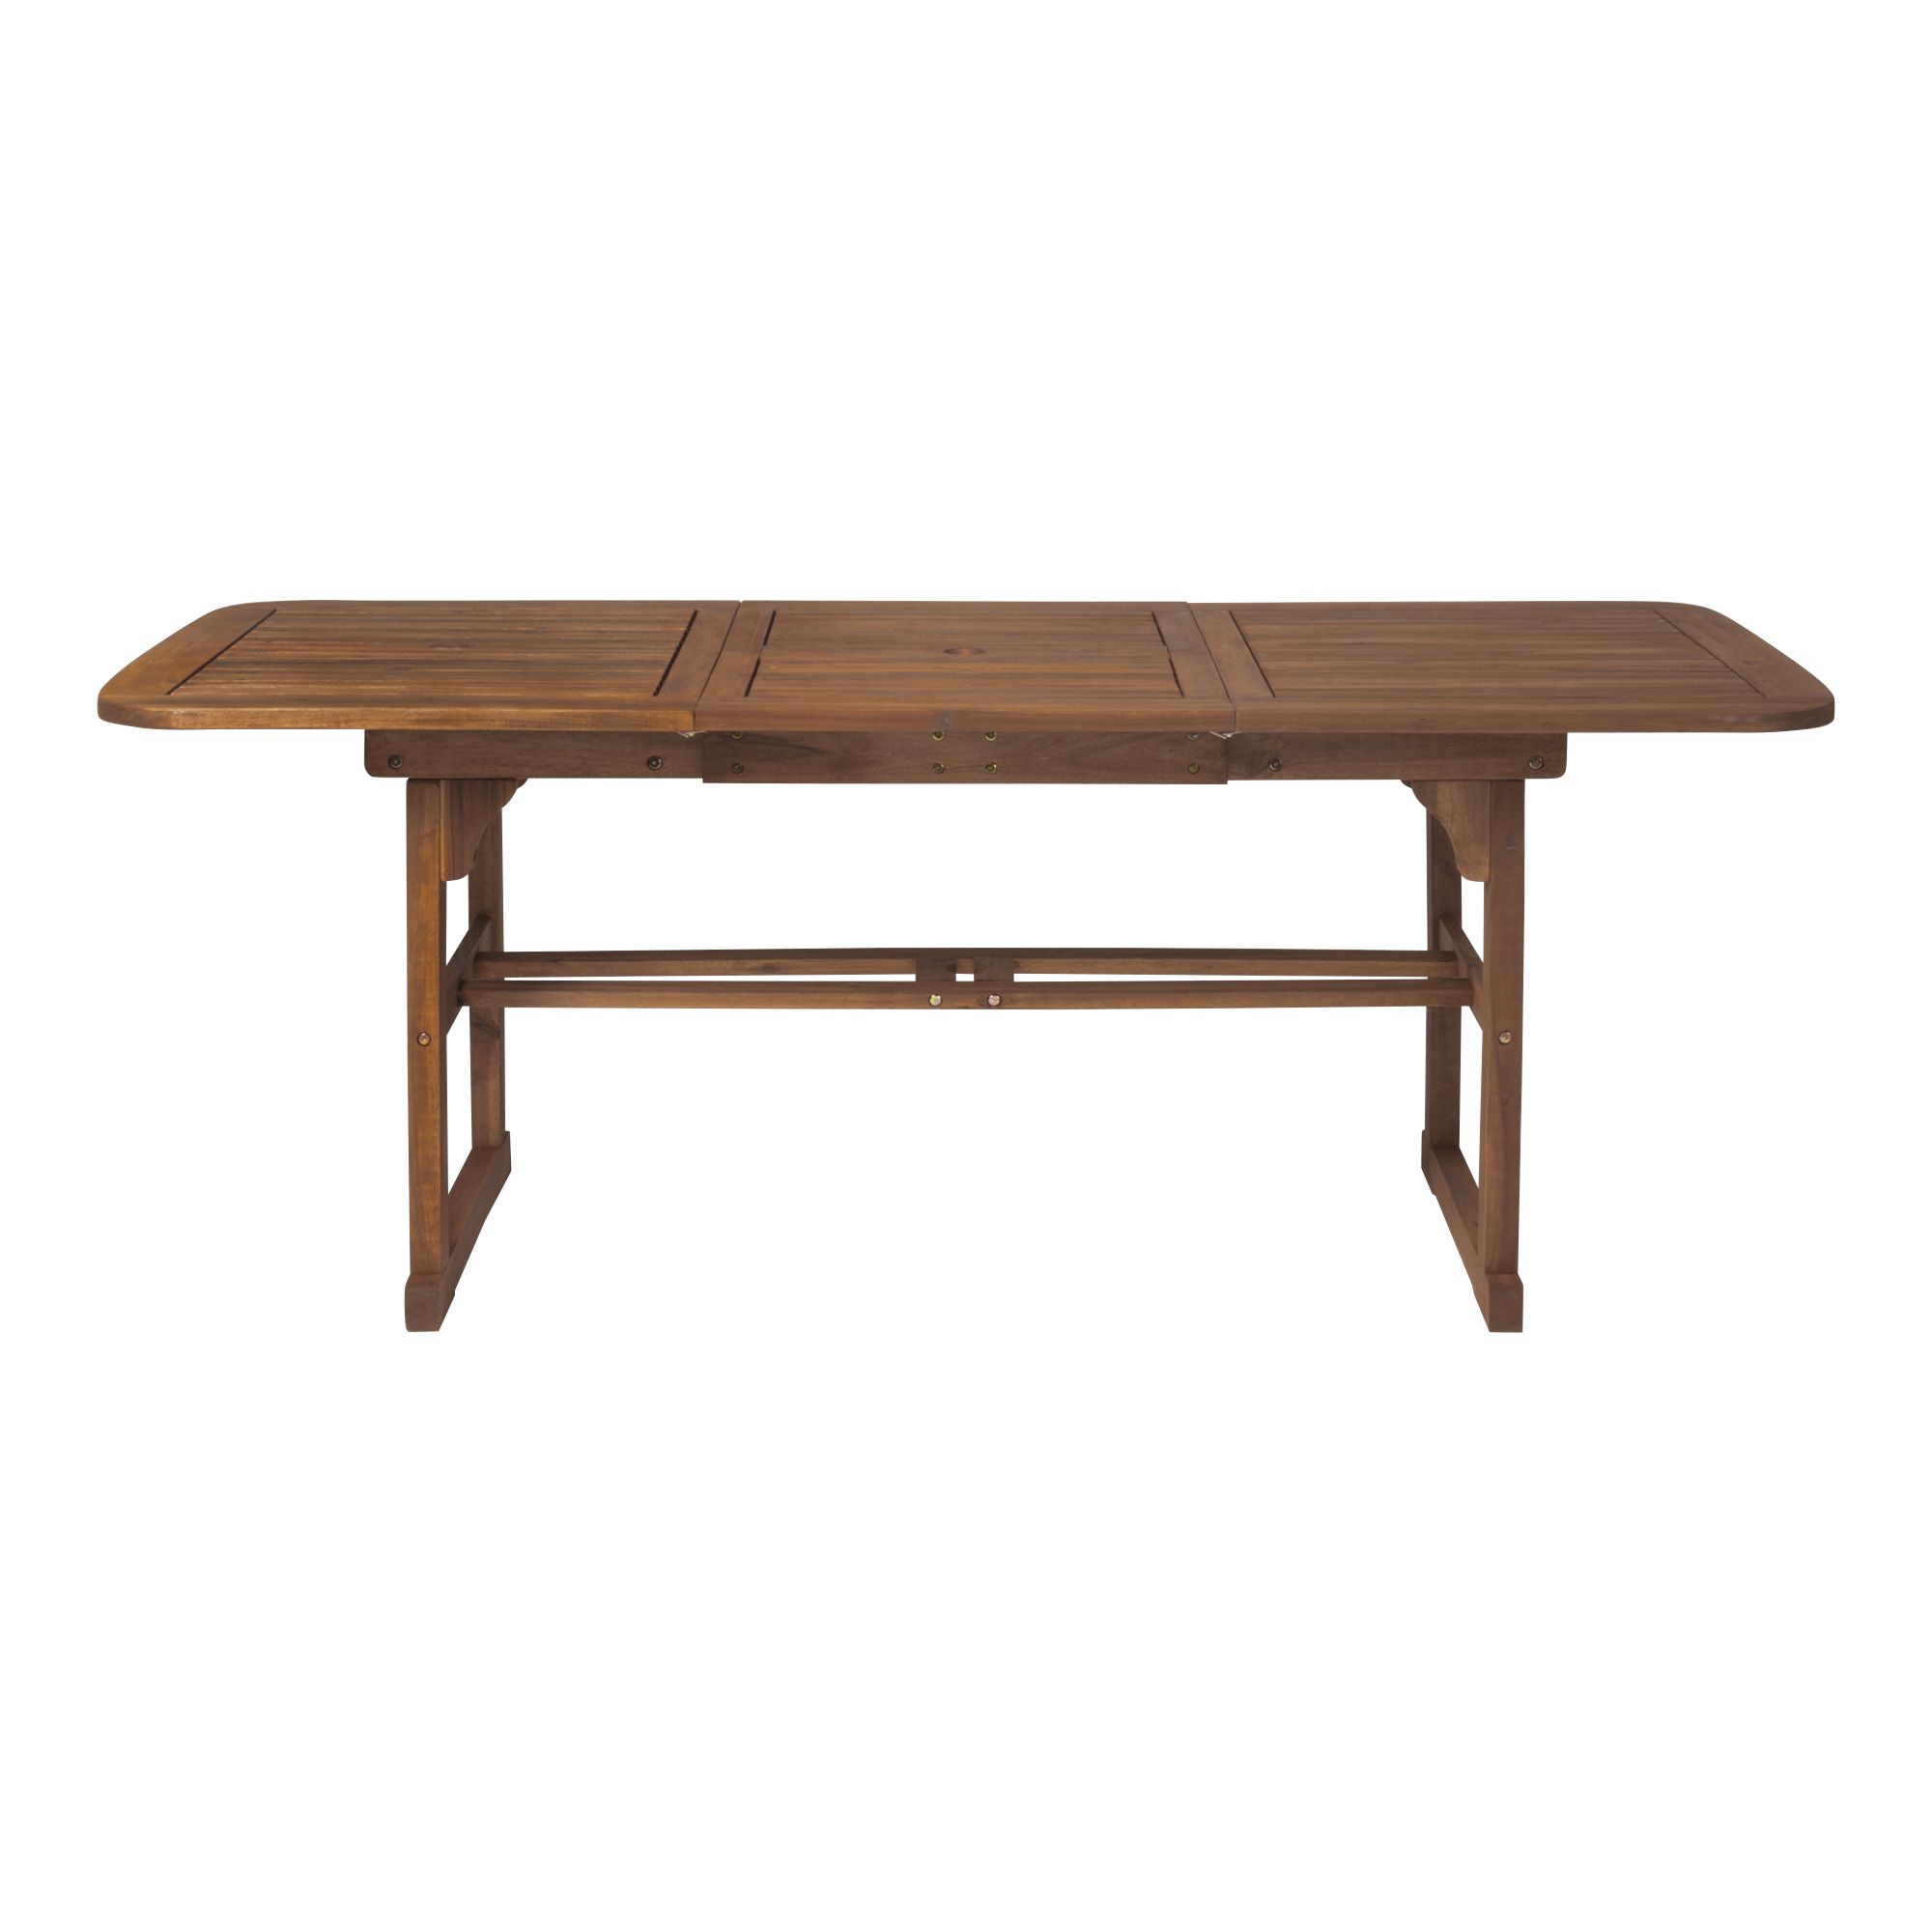 W. Trends Outdoor Hunter Acacia Wood Dining Table - Dark Brown